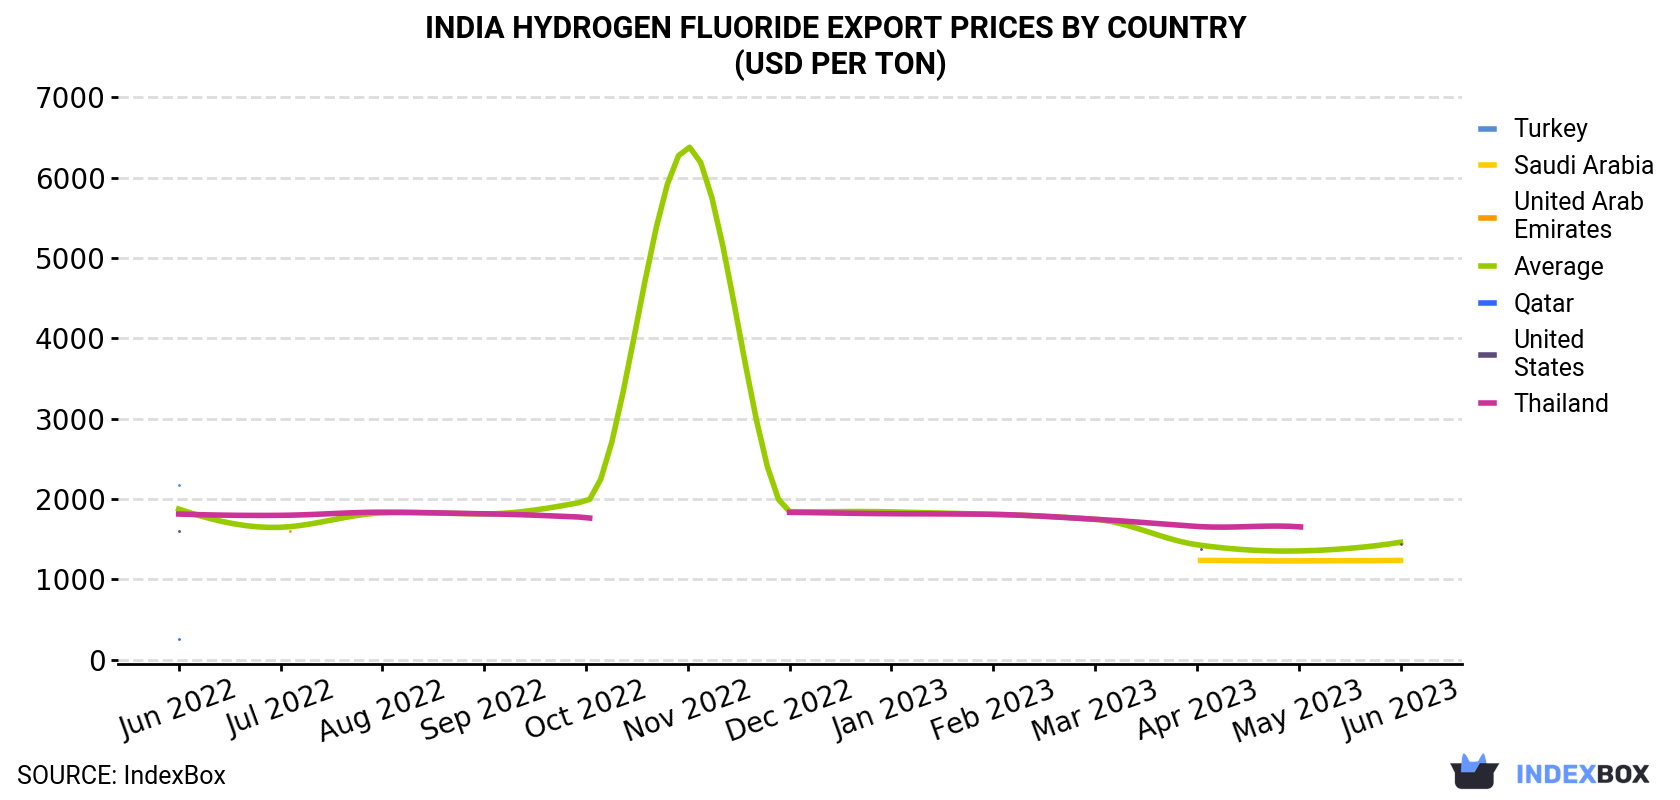 India Hydrogen Fluoride Export Prices By Country (USD Per Ton)